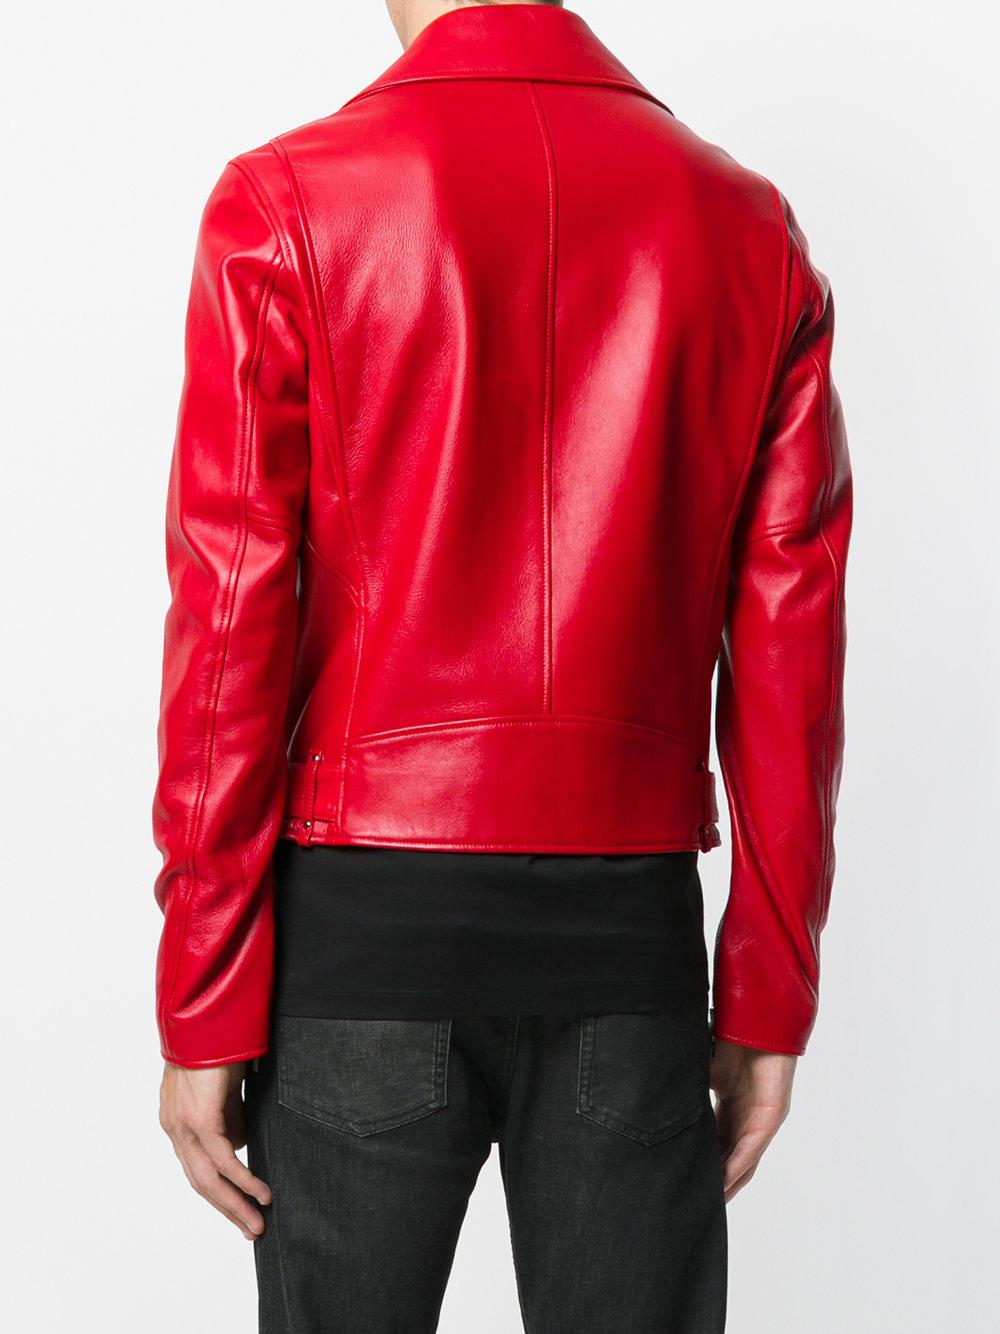 Versace Leather Classic Biker Jacket in Red for Men - Lyst